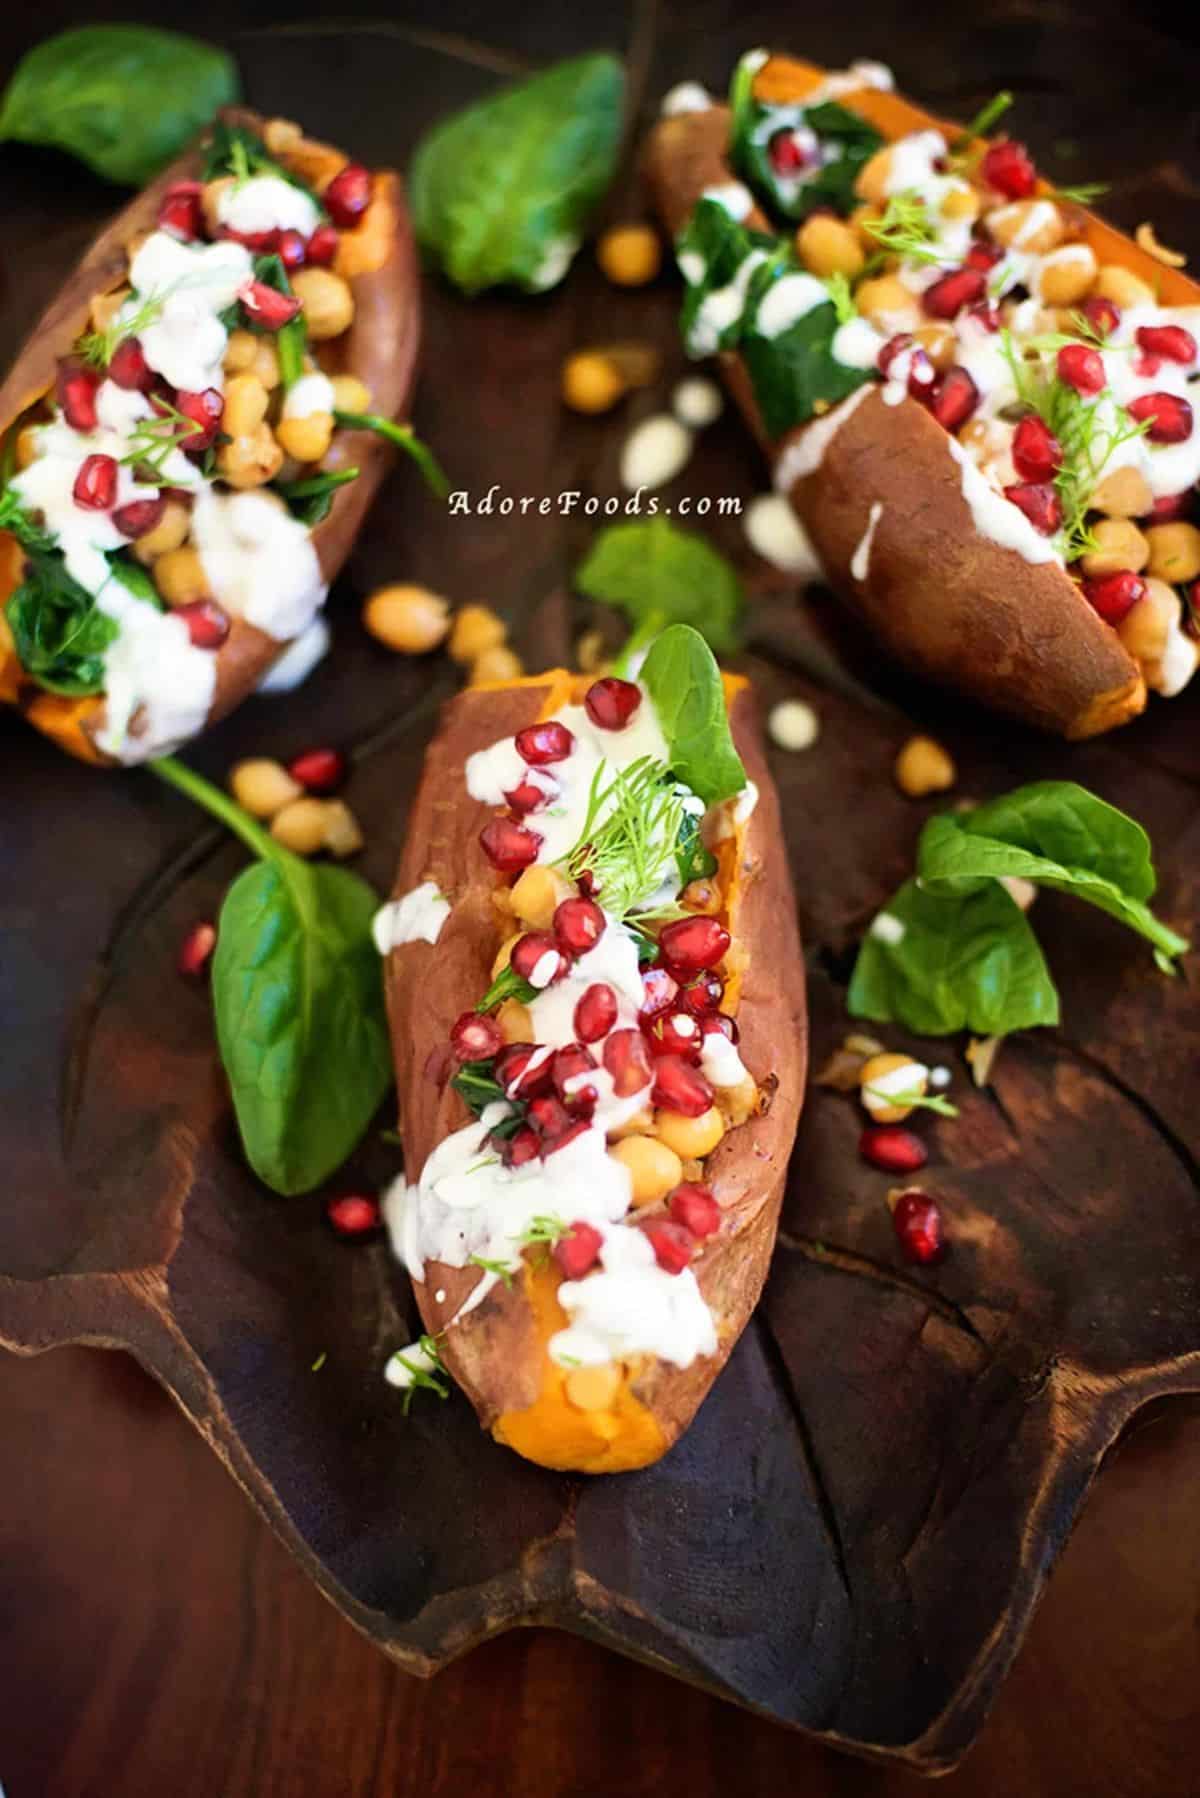 Scrumptious Stuffed Sweet Potatoes with Chickpeas on a wooden tray.